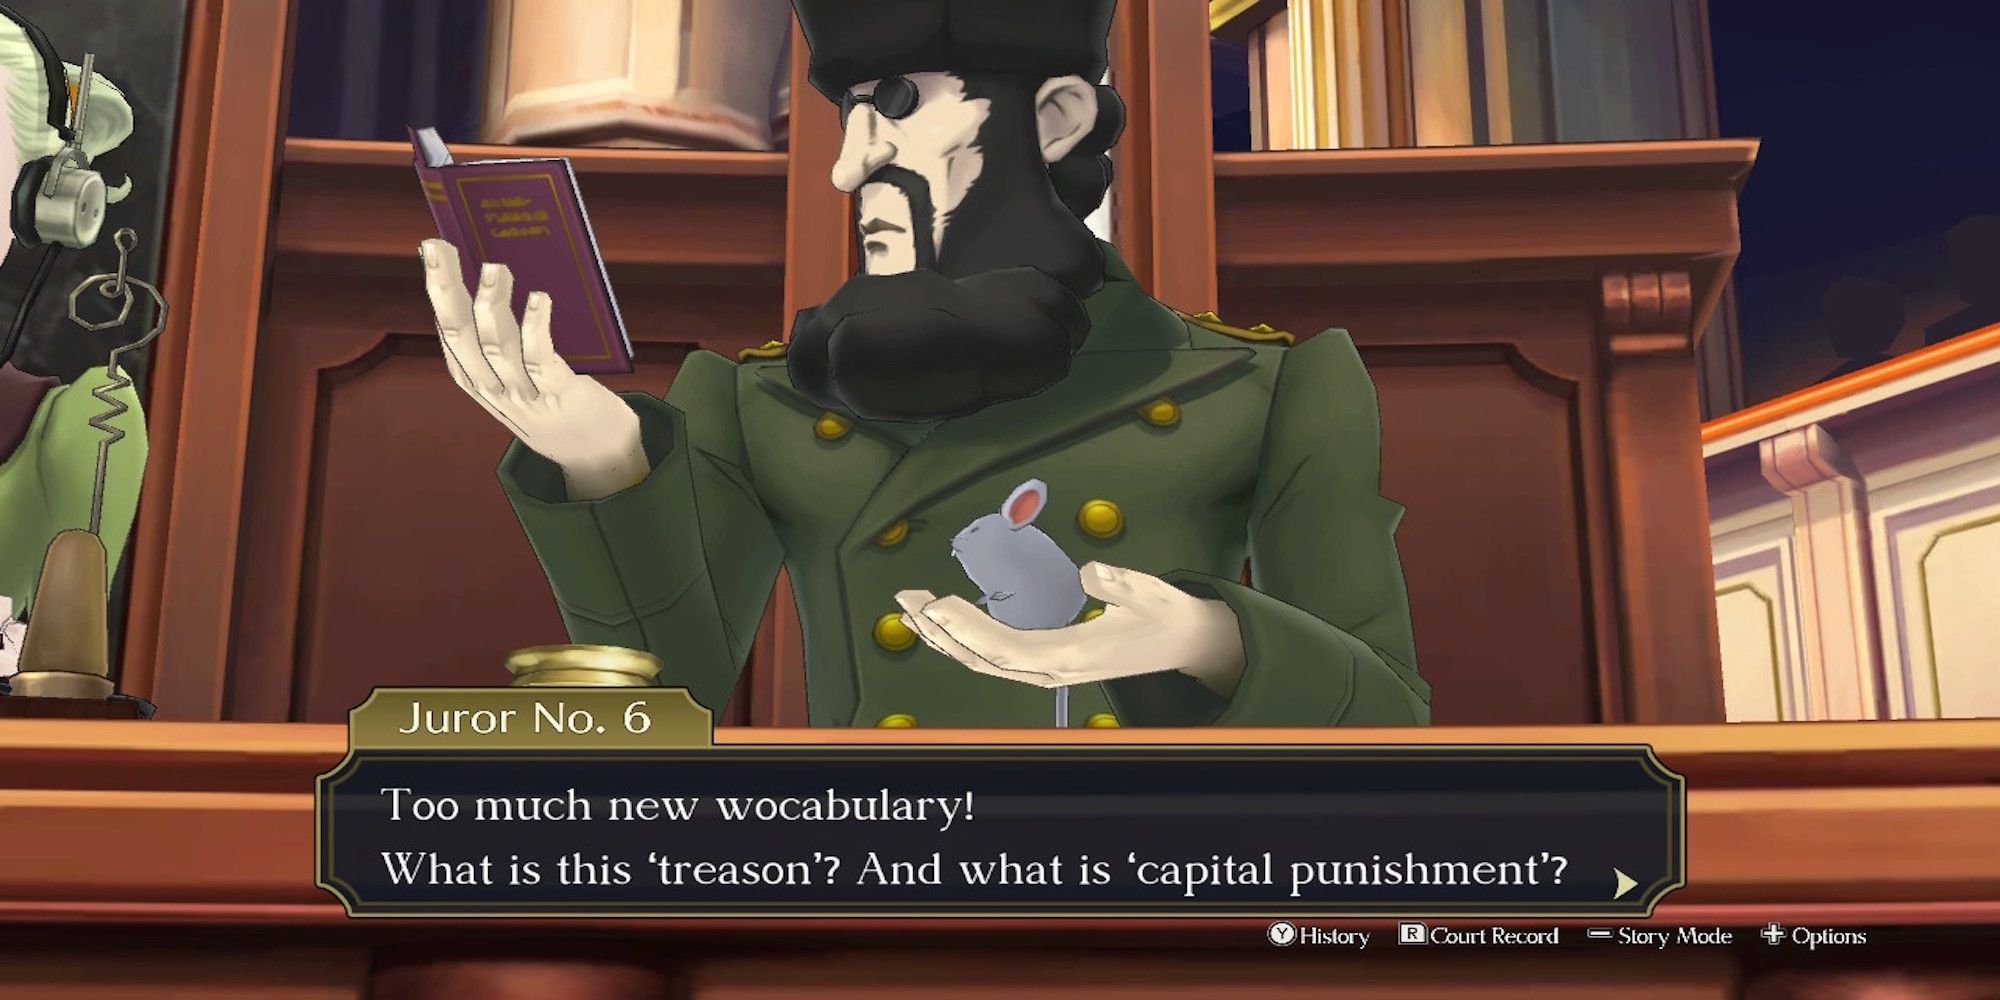 Vilen Borshevik from The Great Ace Attorney Chronicles